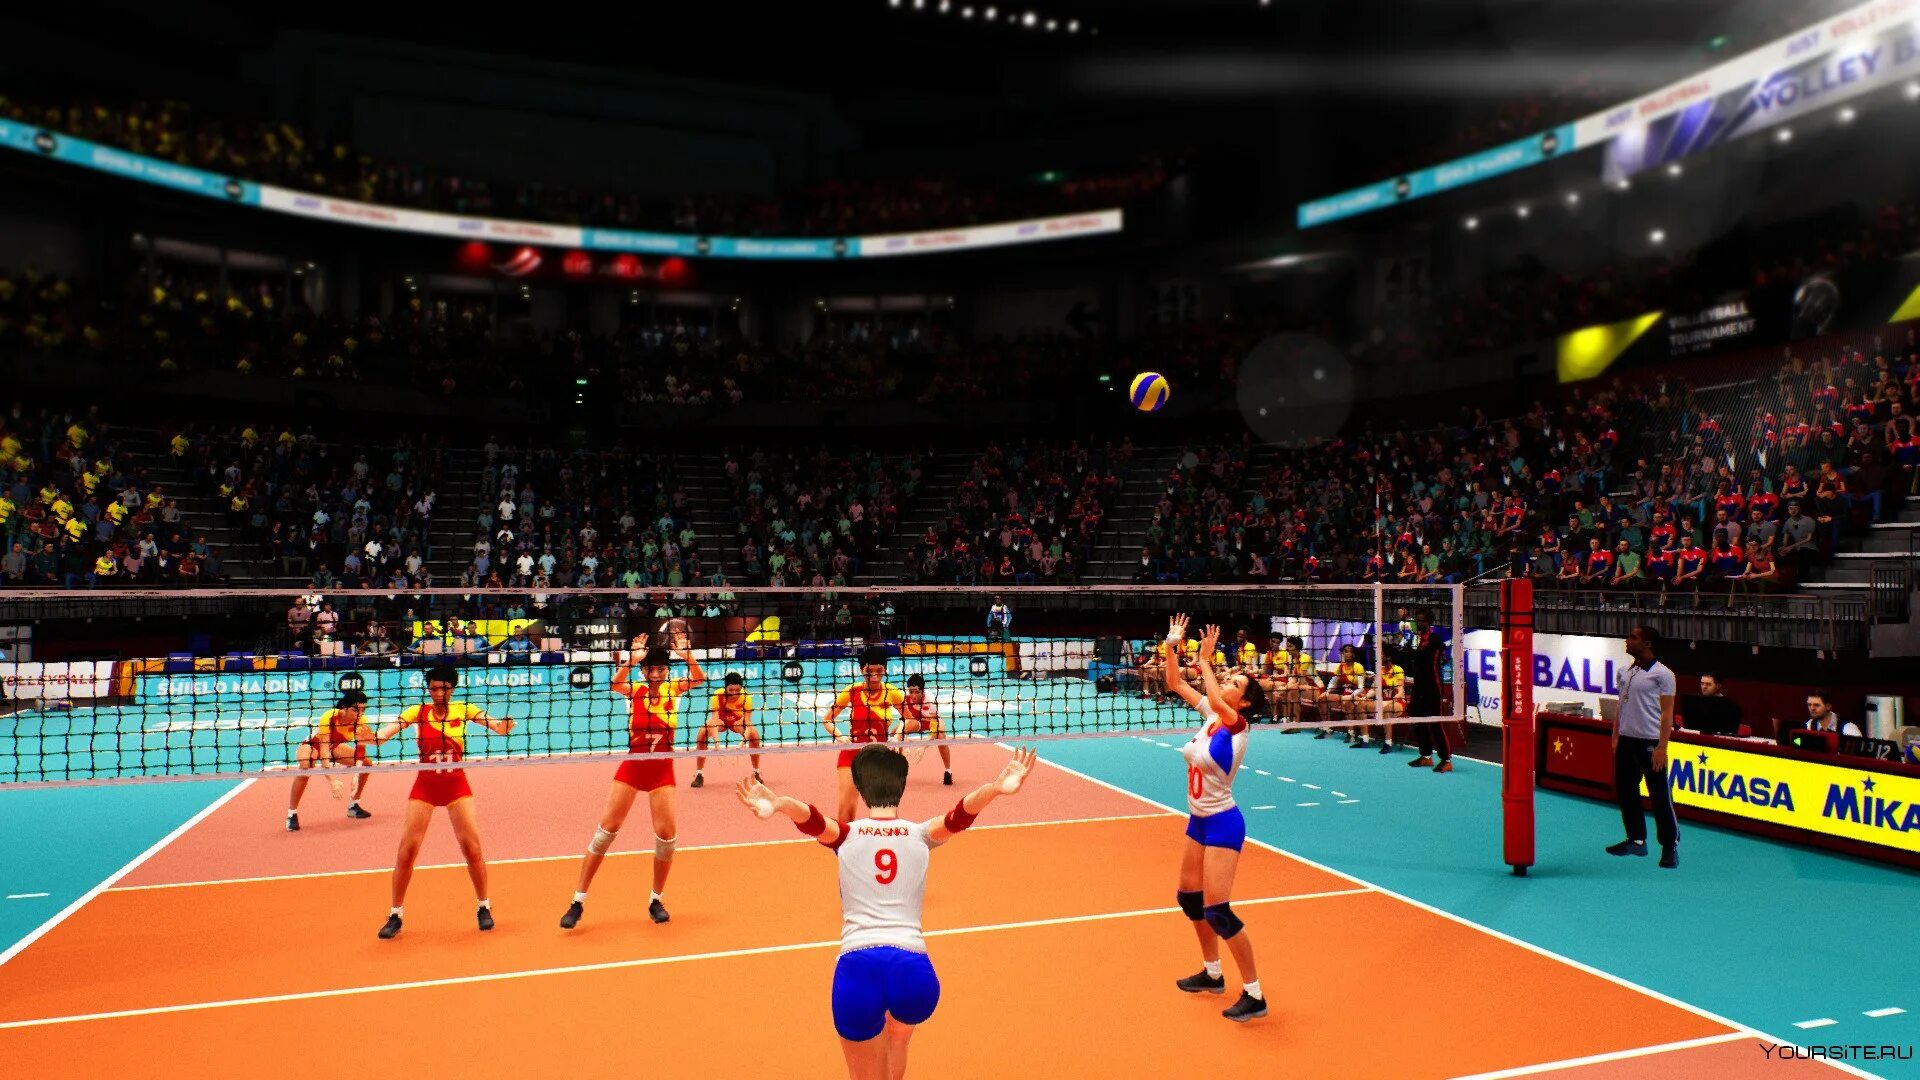 Spike Volleyball. The Spike Volleyball игра. Spike в волейболе. Spike Volleyball (PC). Игра 4 на 4 волейбол